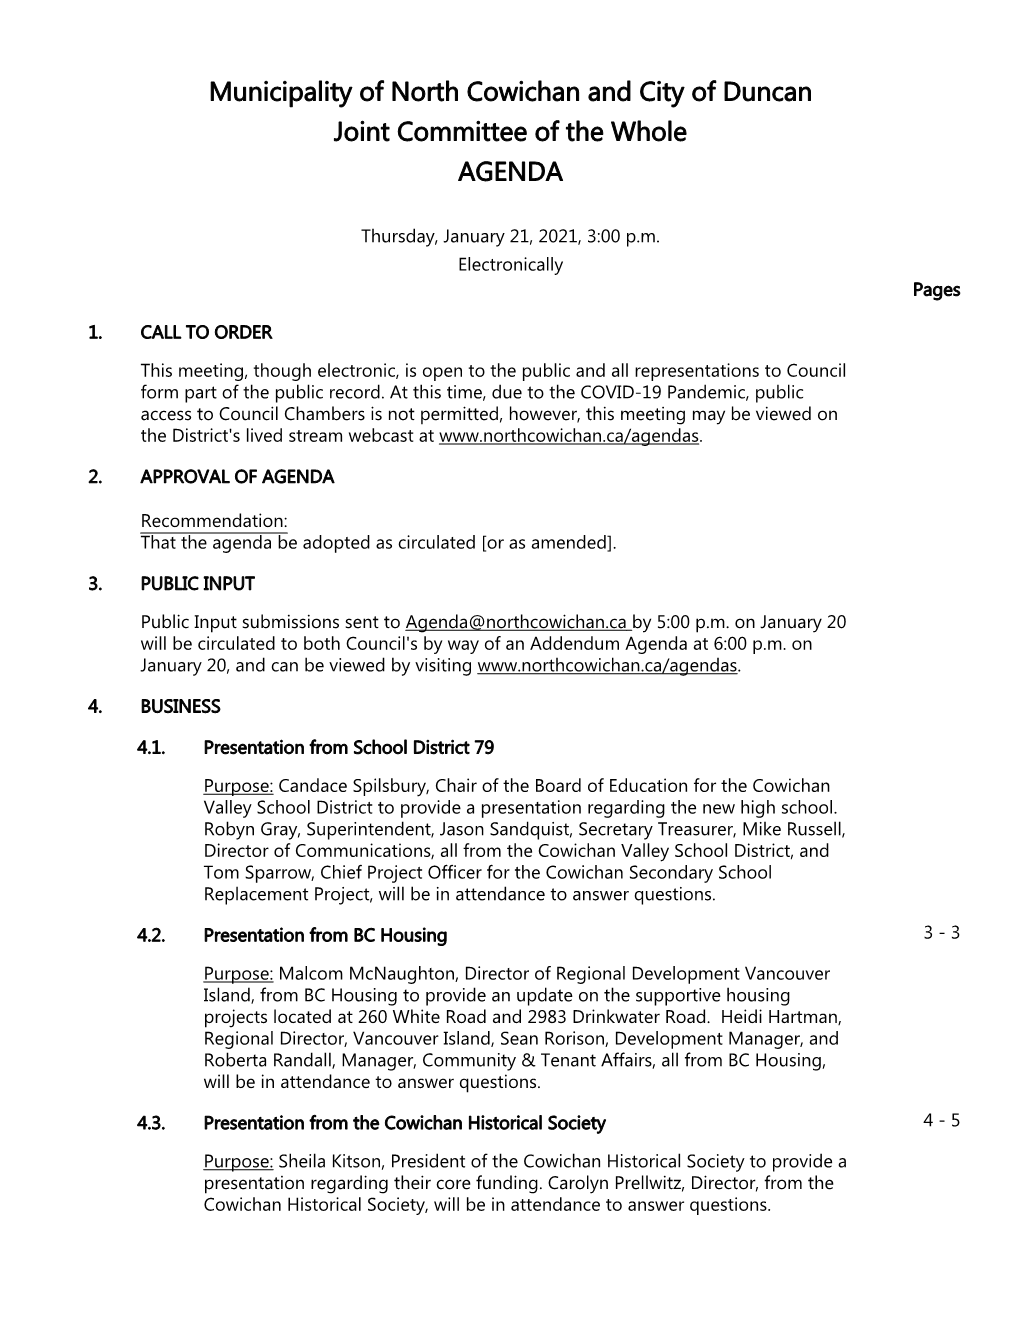 Municipality of North Cowichan Committee of the Whole Agenda